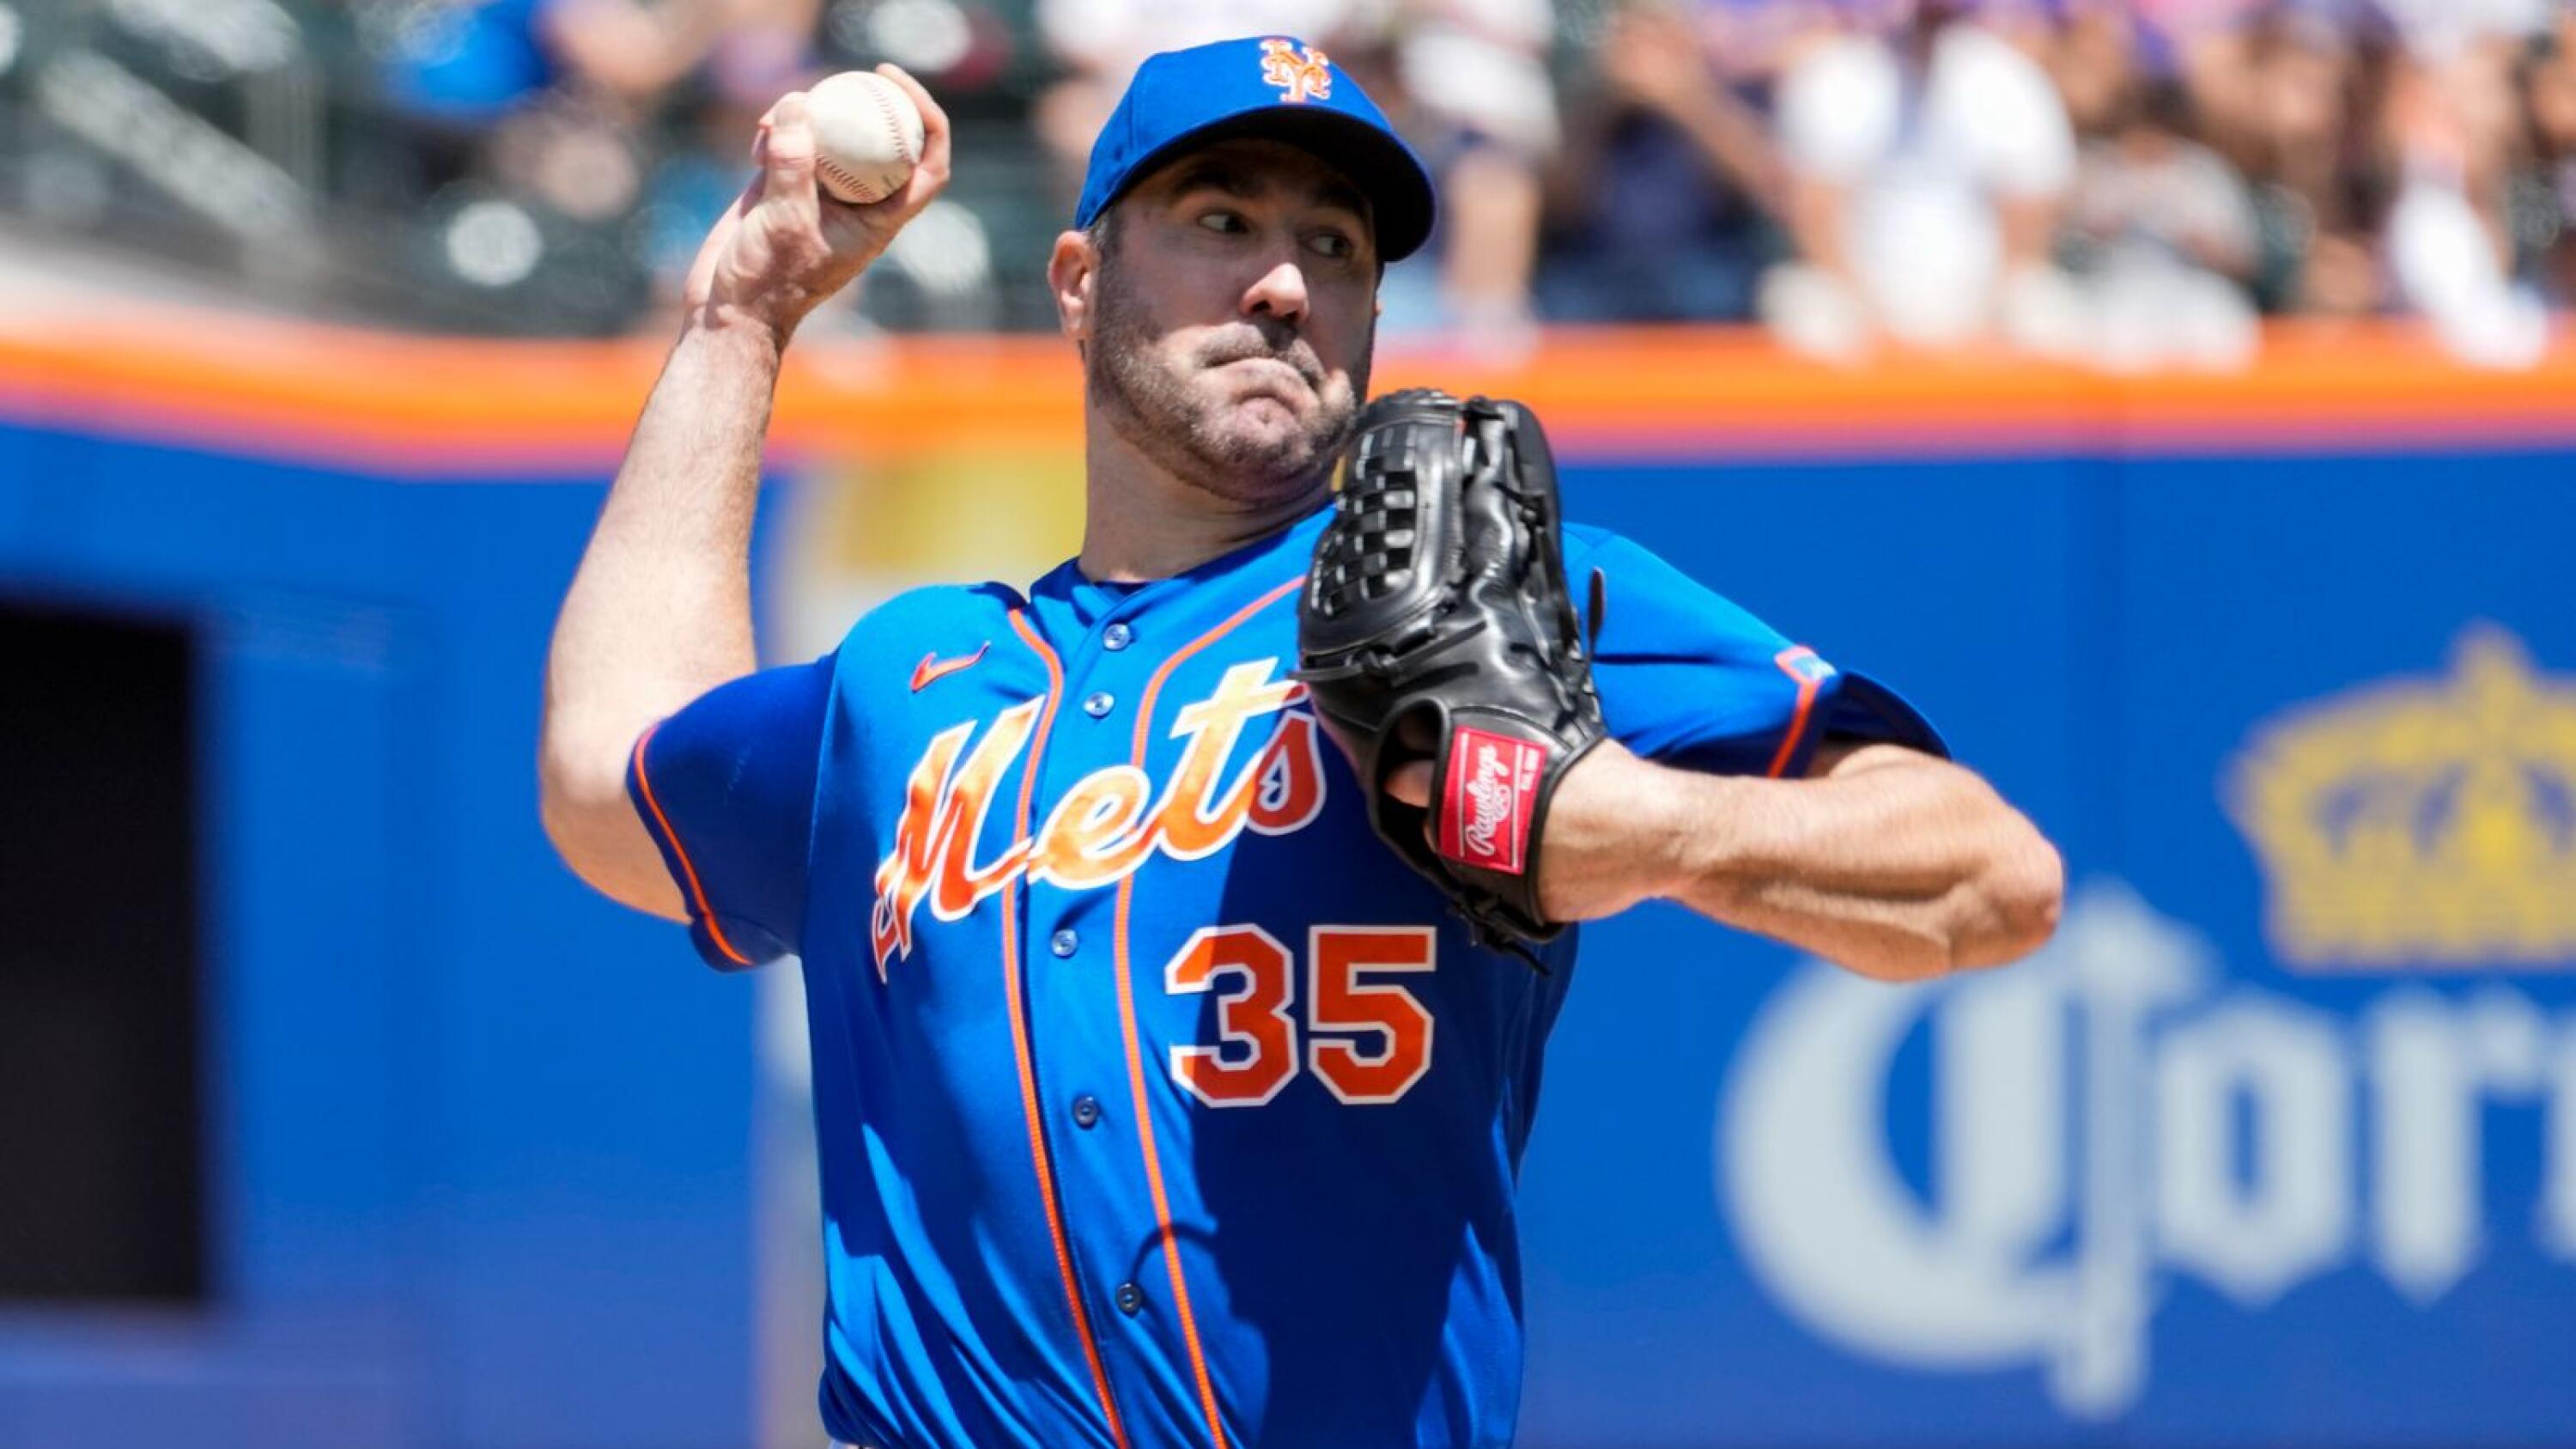 Scherzer throws 8 innings and Lindor has 5 RBIs as the Mets rout